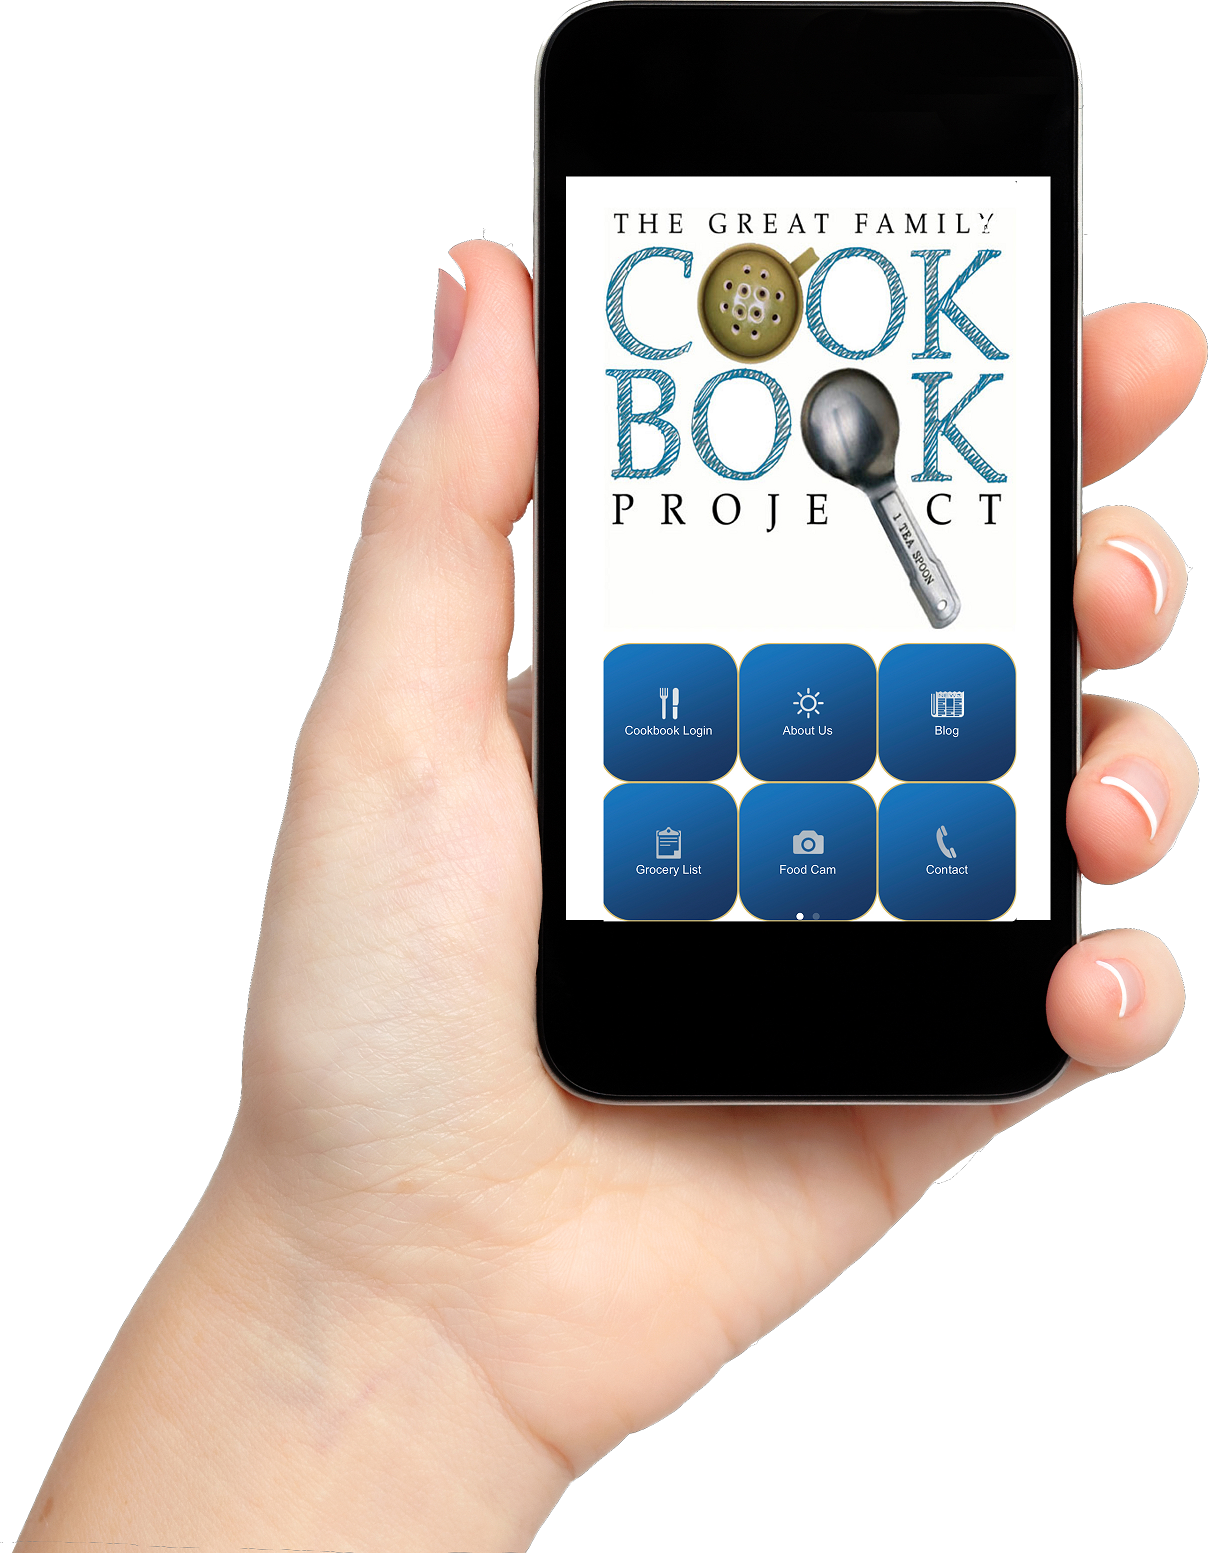 Family Cookbook Project Wins Best Cooking Mobile App from Web Marketing Association